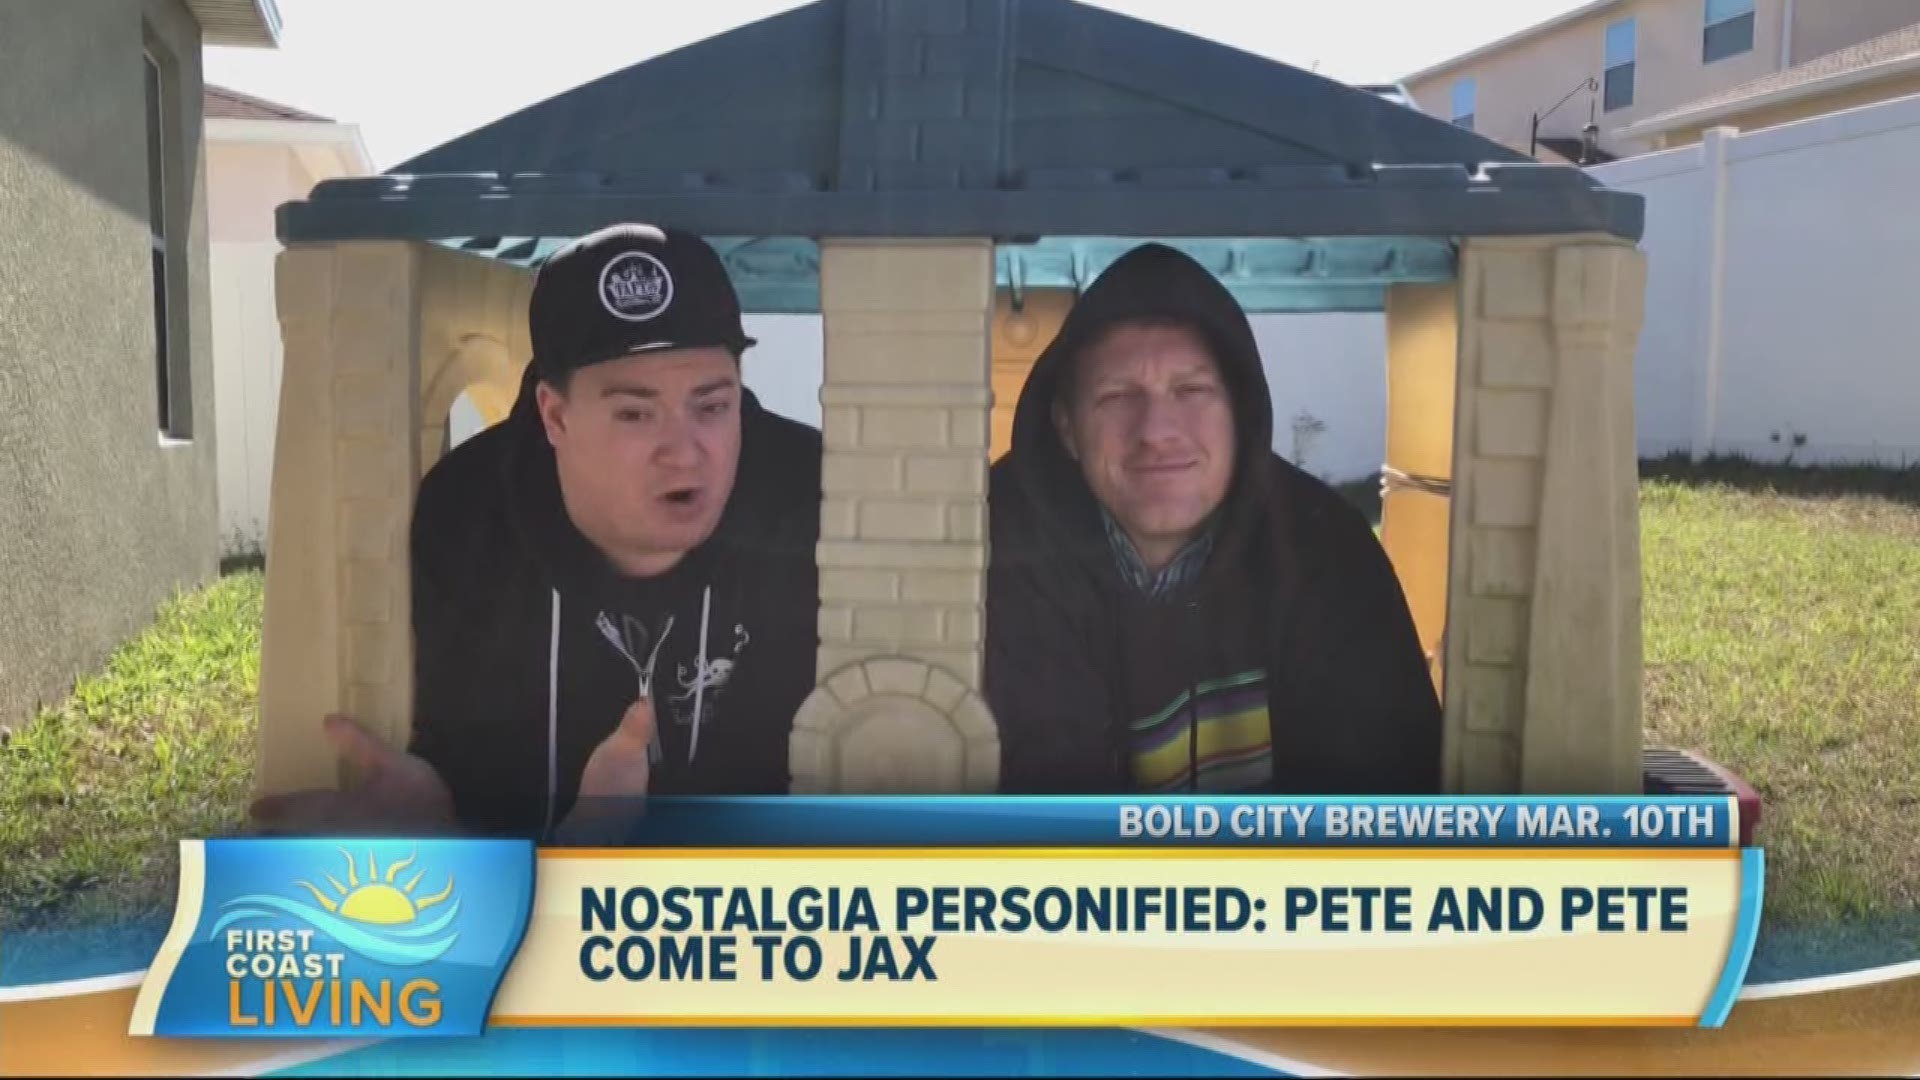 Former child stars Danny Tamberelli and Michael C. Maronna have a message for the First Coast!